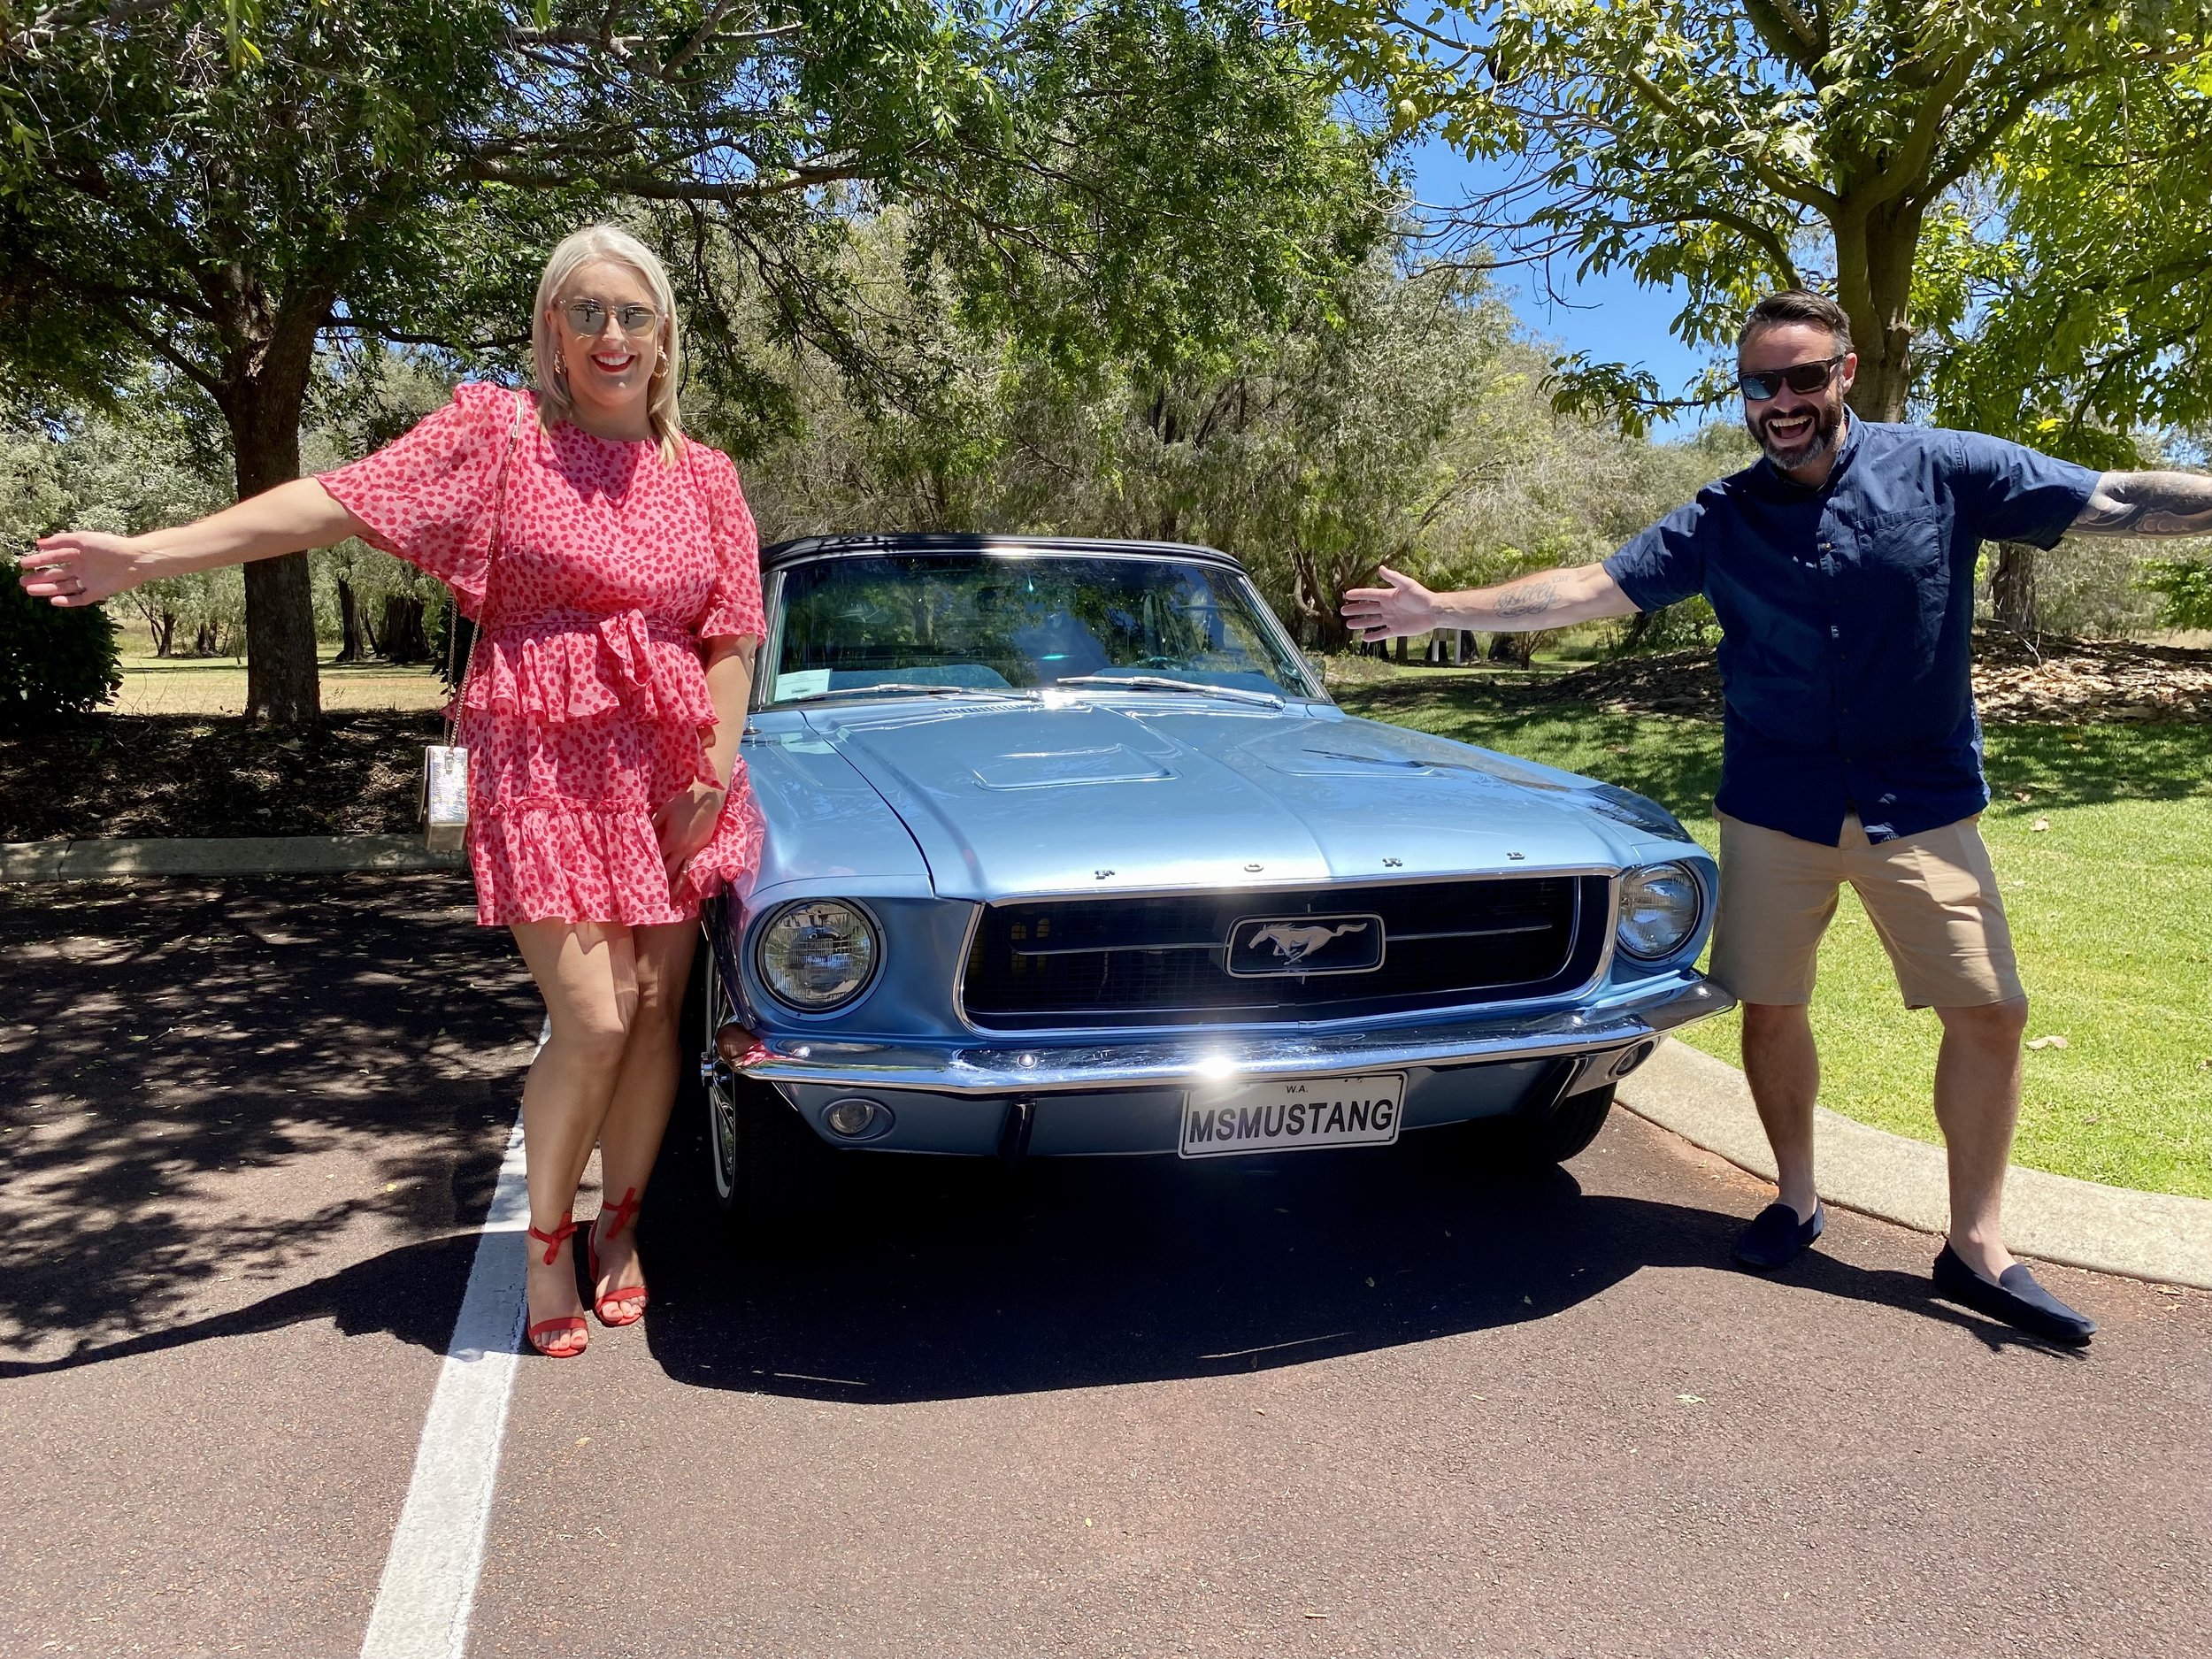 special occasion car hire-birthday-classic car-mustang-dunsborough-fametree wines2.JPG